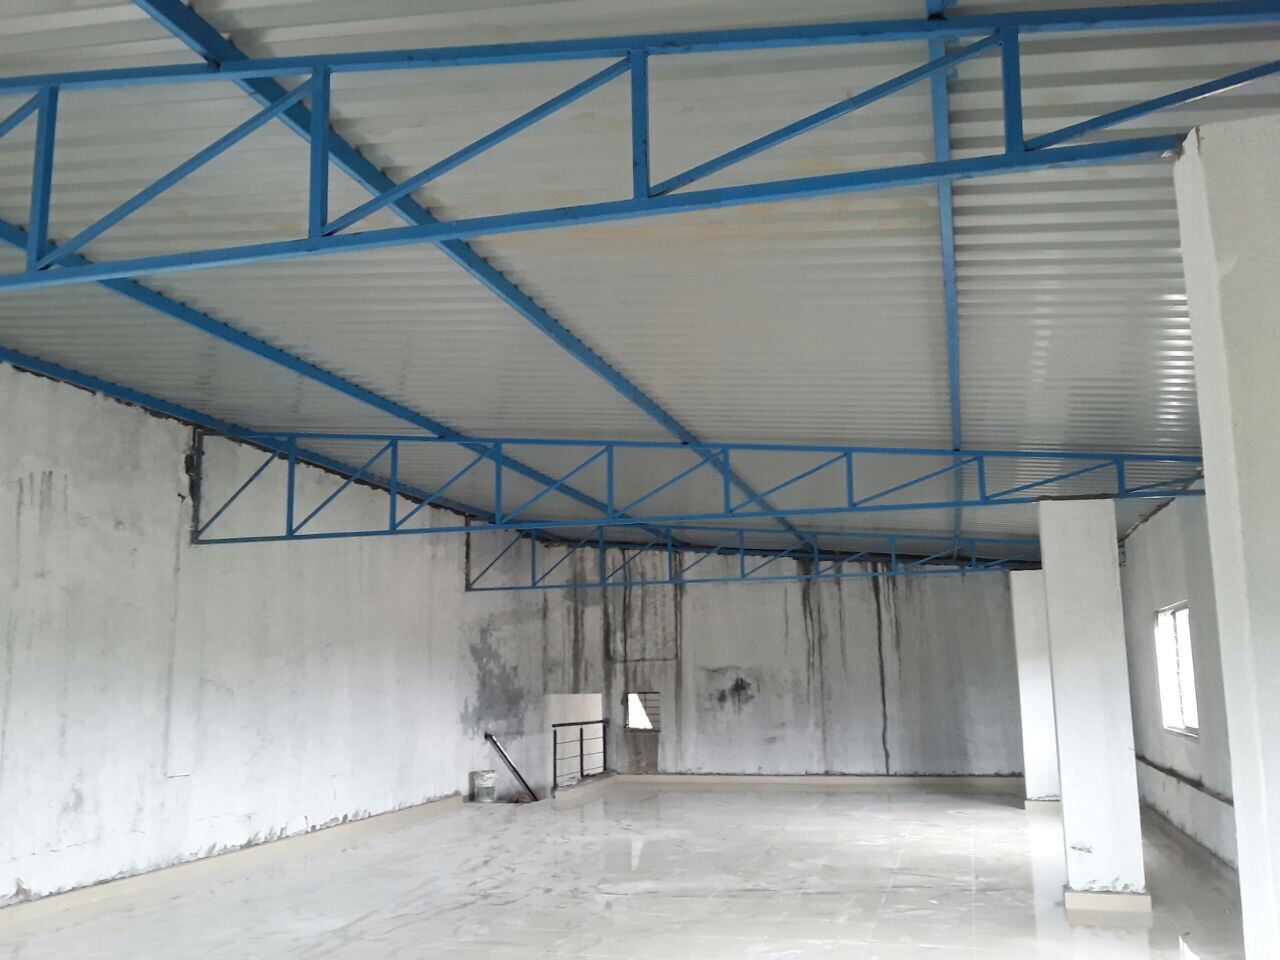 Industrial property for lease, Factory on rent in Paud ...